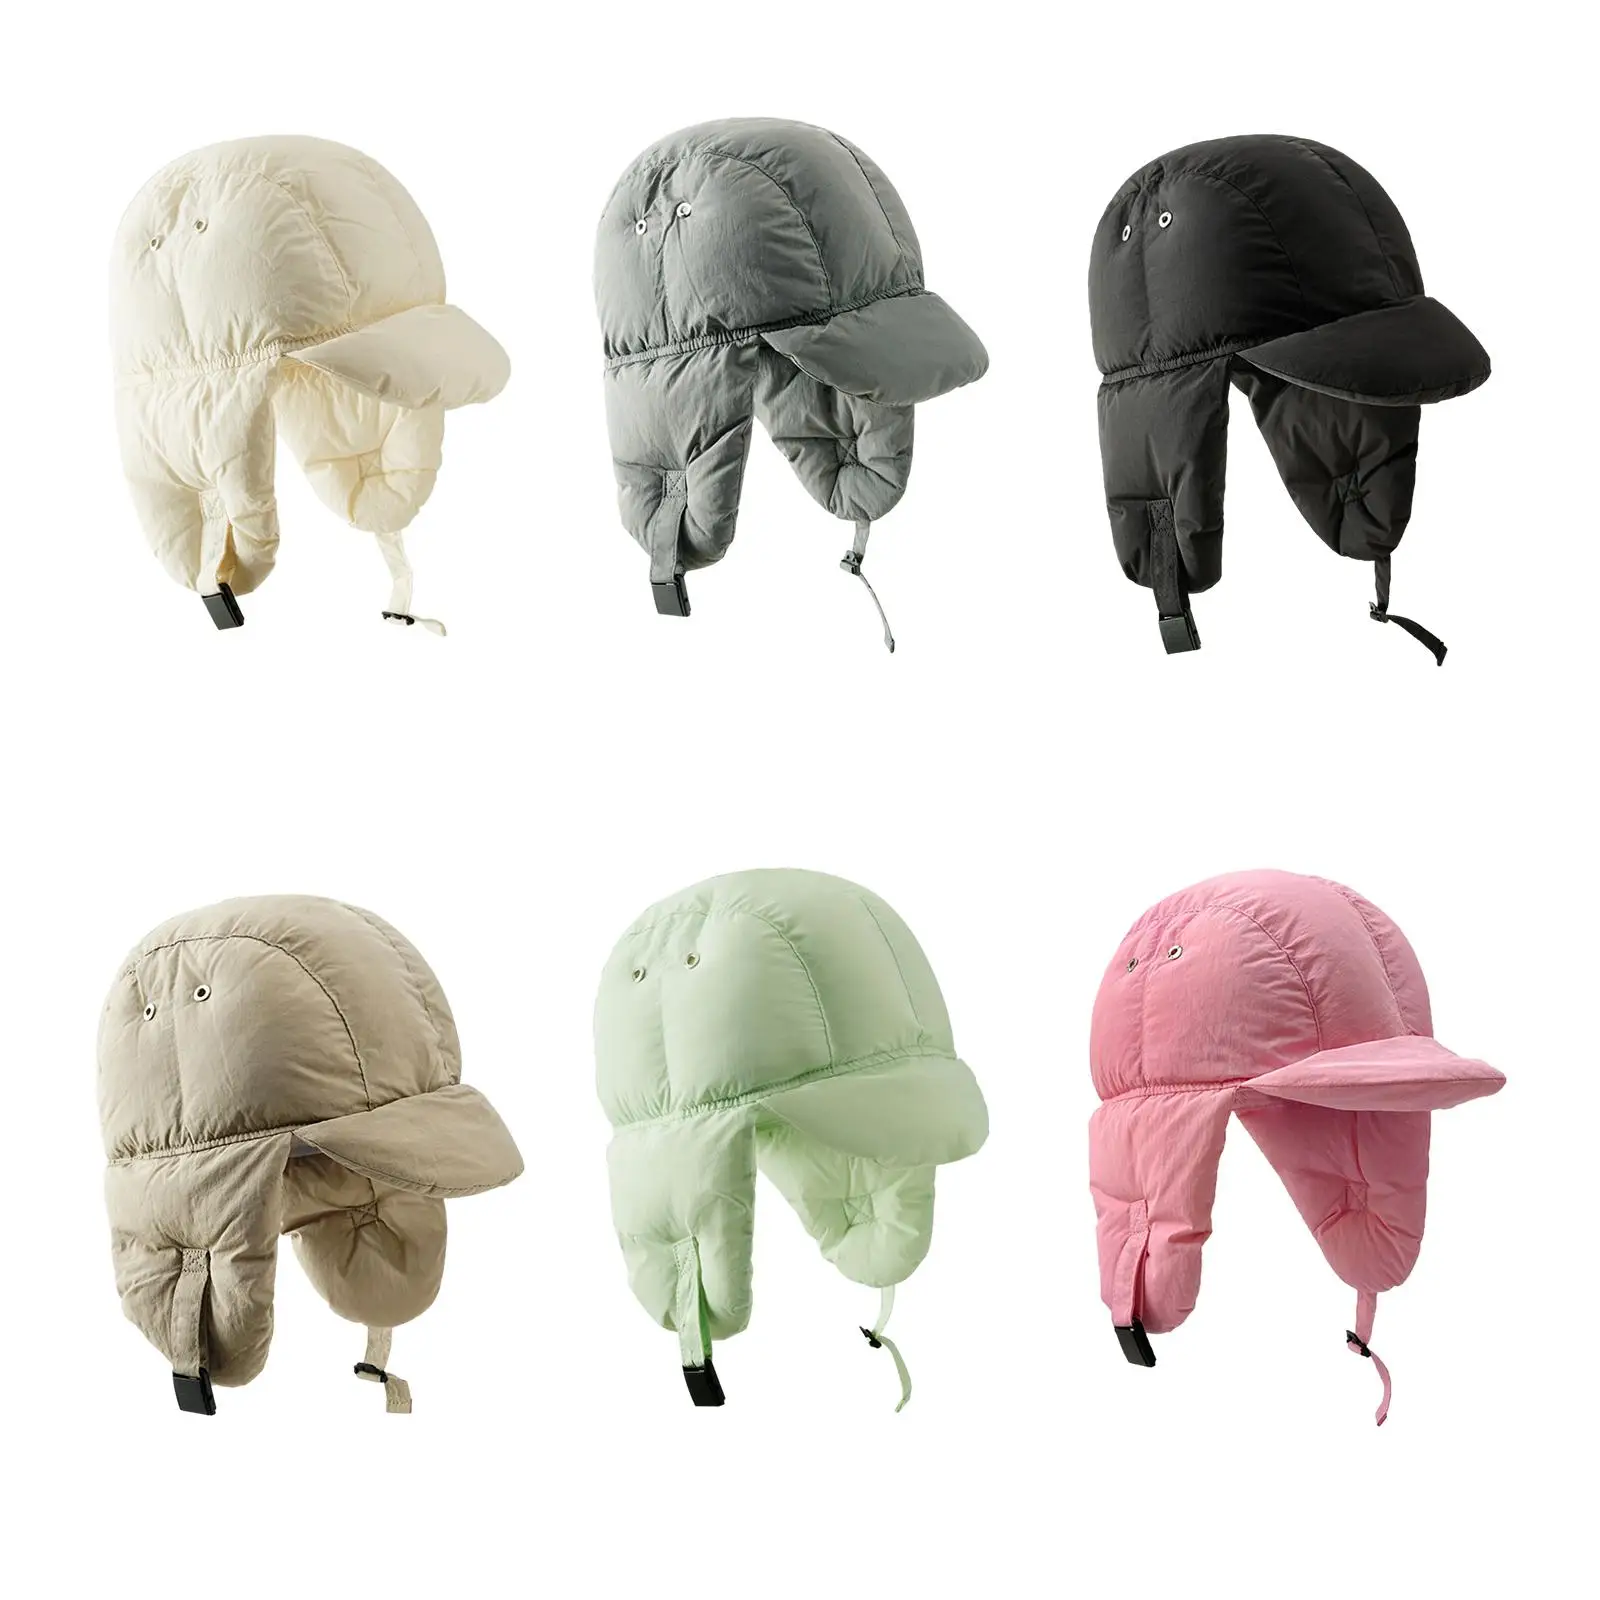 Hat with Earflaps Peaked Hat Comfortable Windproof for Men Women Cap Winter Hat for Skating Snow Sports Biking Skiing Female